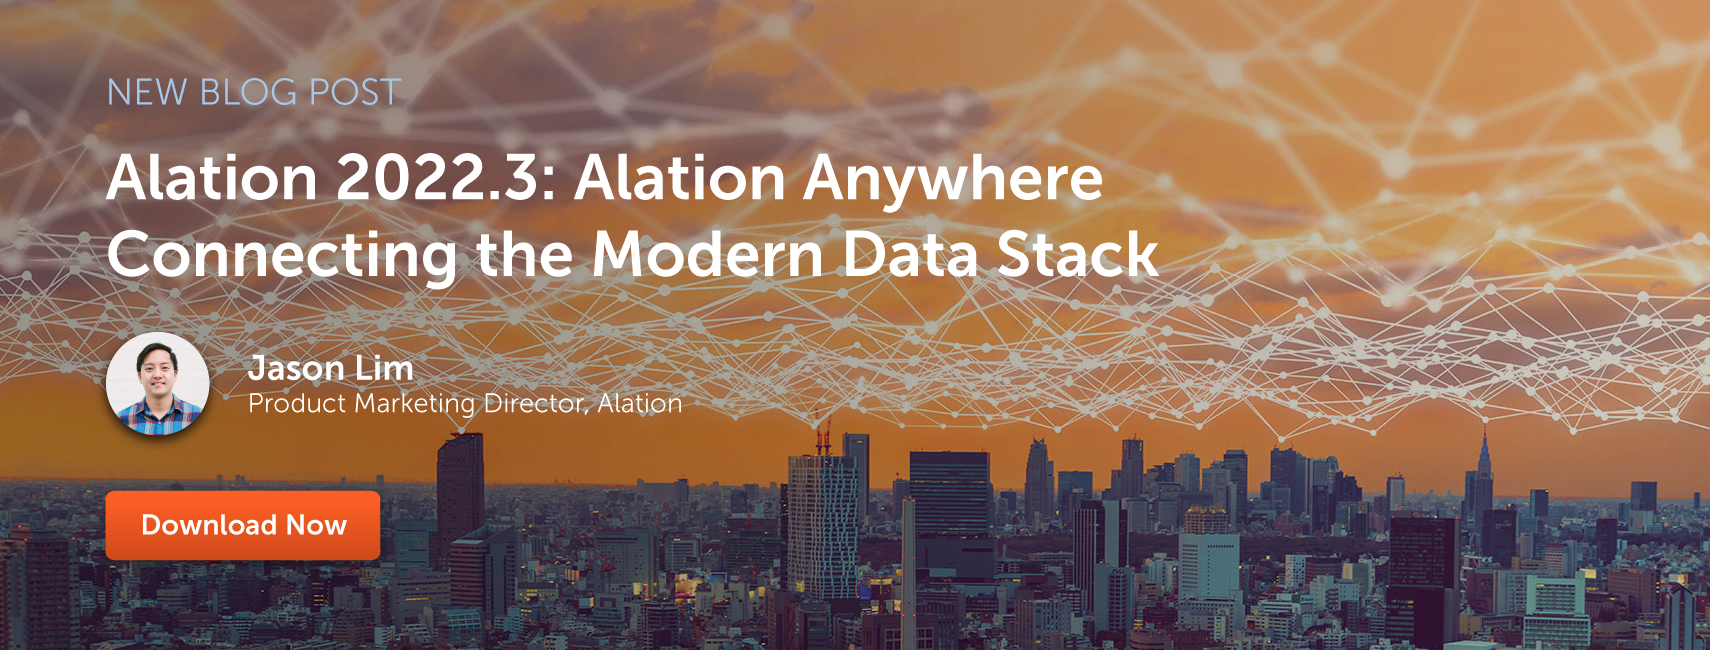 Alation 2022.3: Alation Anywhere Connecting the Modern Data Stack CTA image